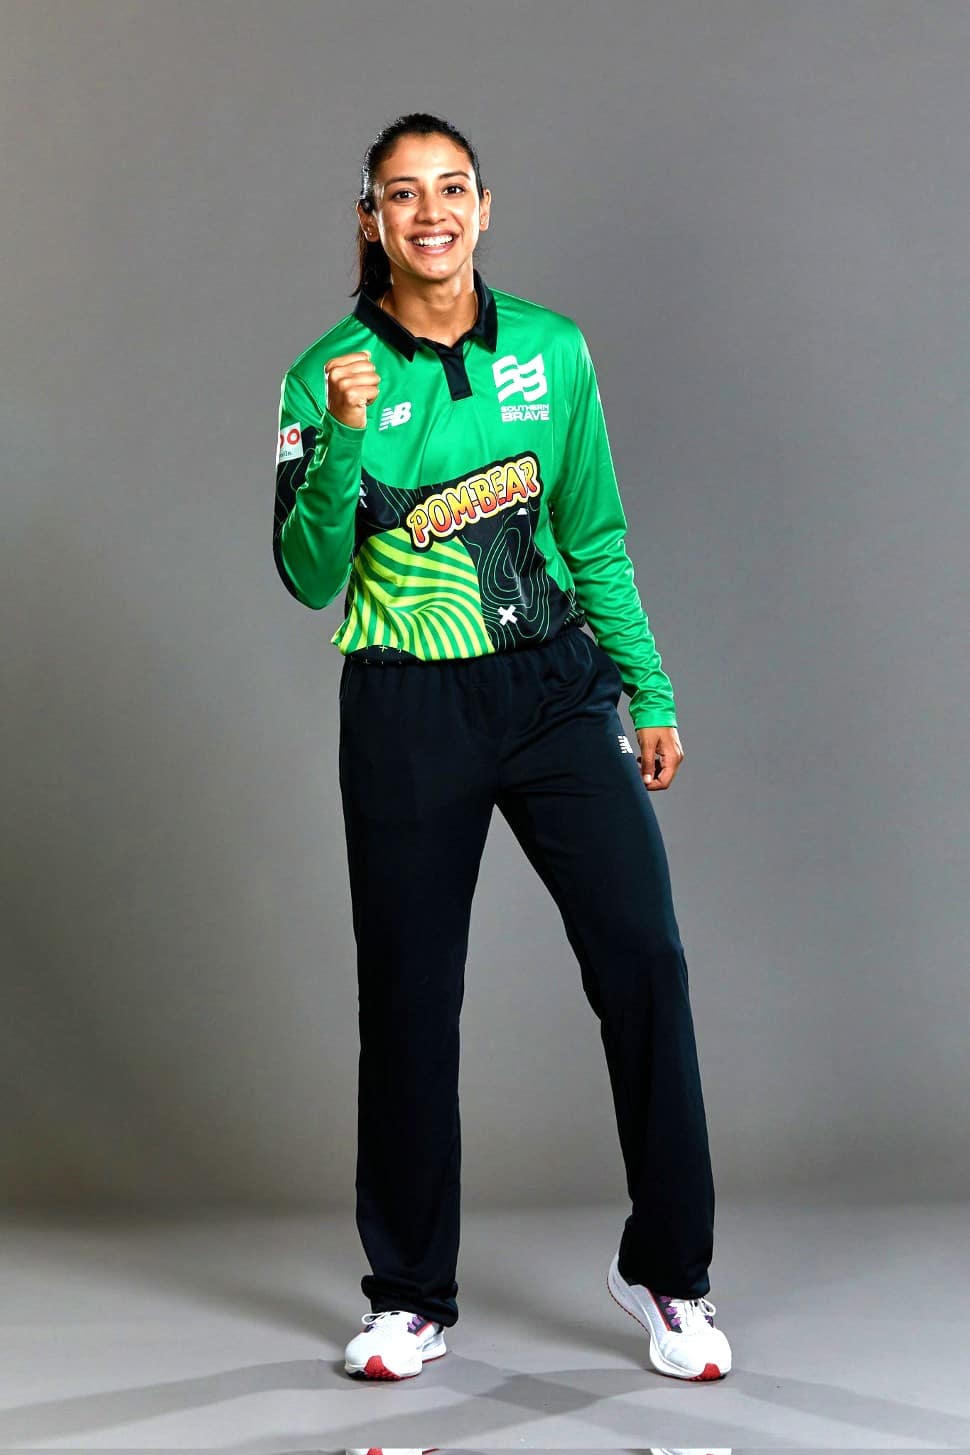 Team India opener Smriti Mandhana is one of the top batters in the world. The 25-year-old Smriti averages over 40 in both Tests and ODIs. (Source: Twitter)